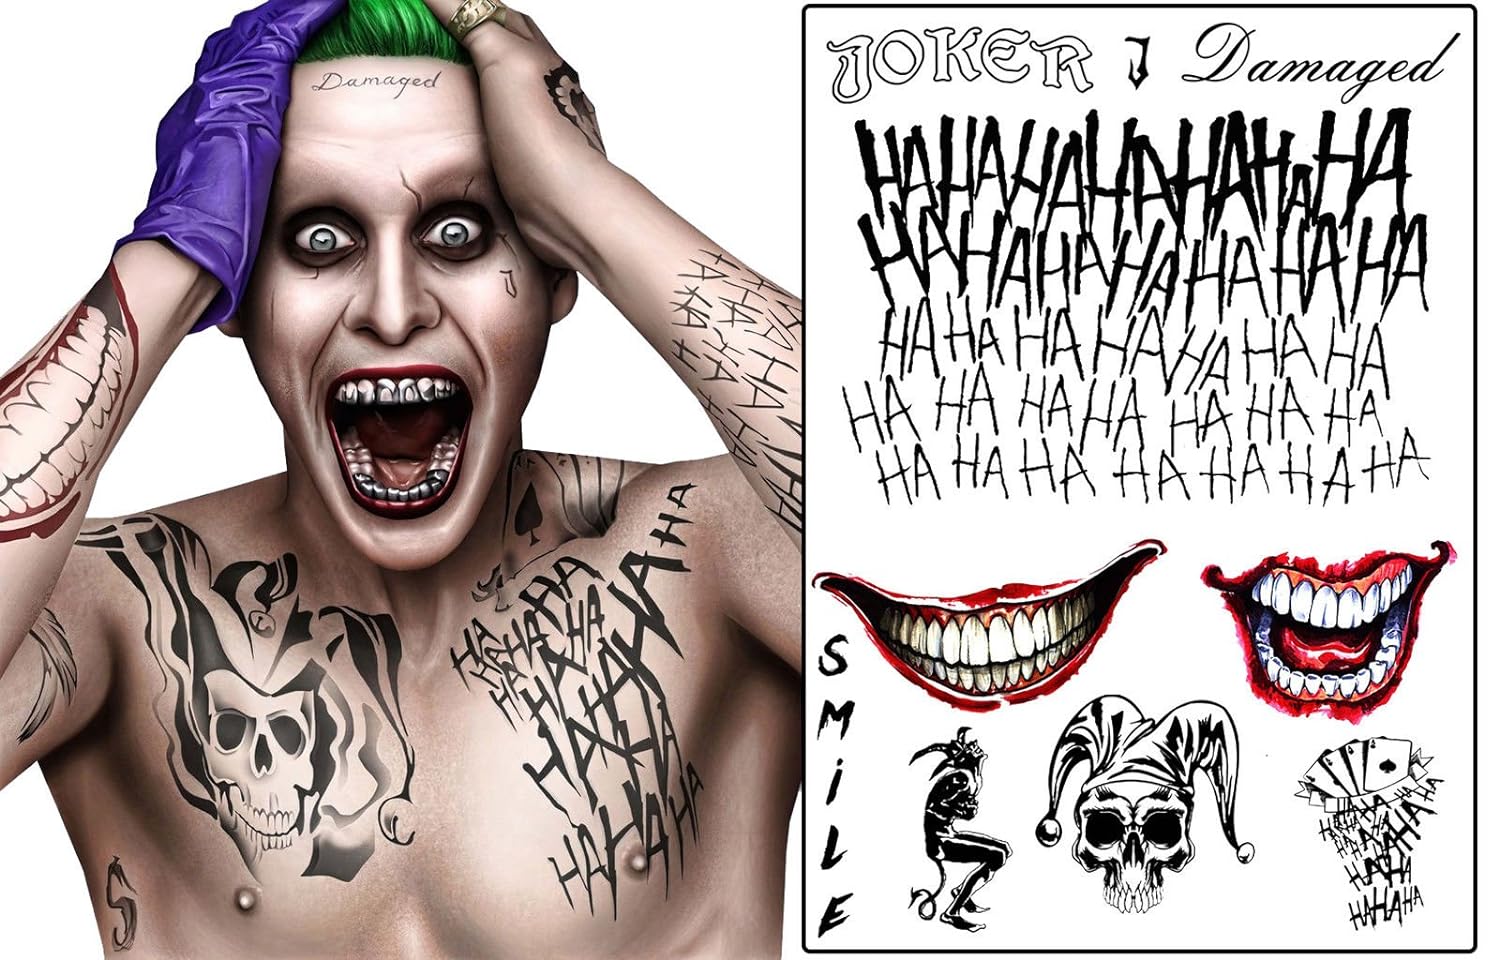 6. Joker's "Ace of Spades" tattoo in Suicide Squad - wide 8